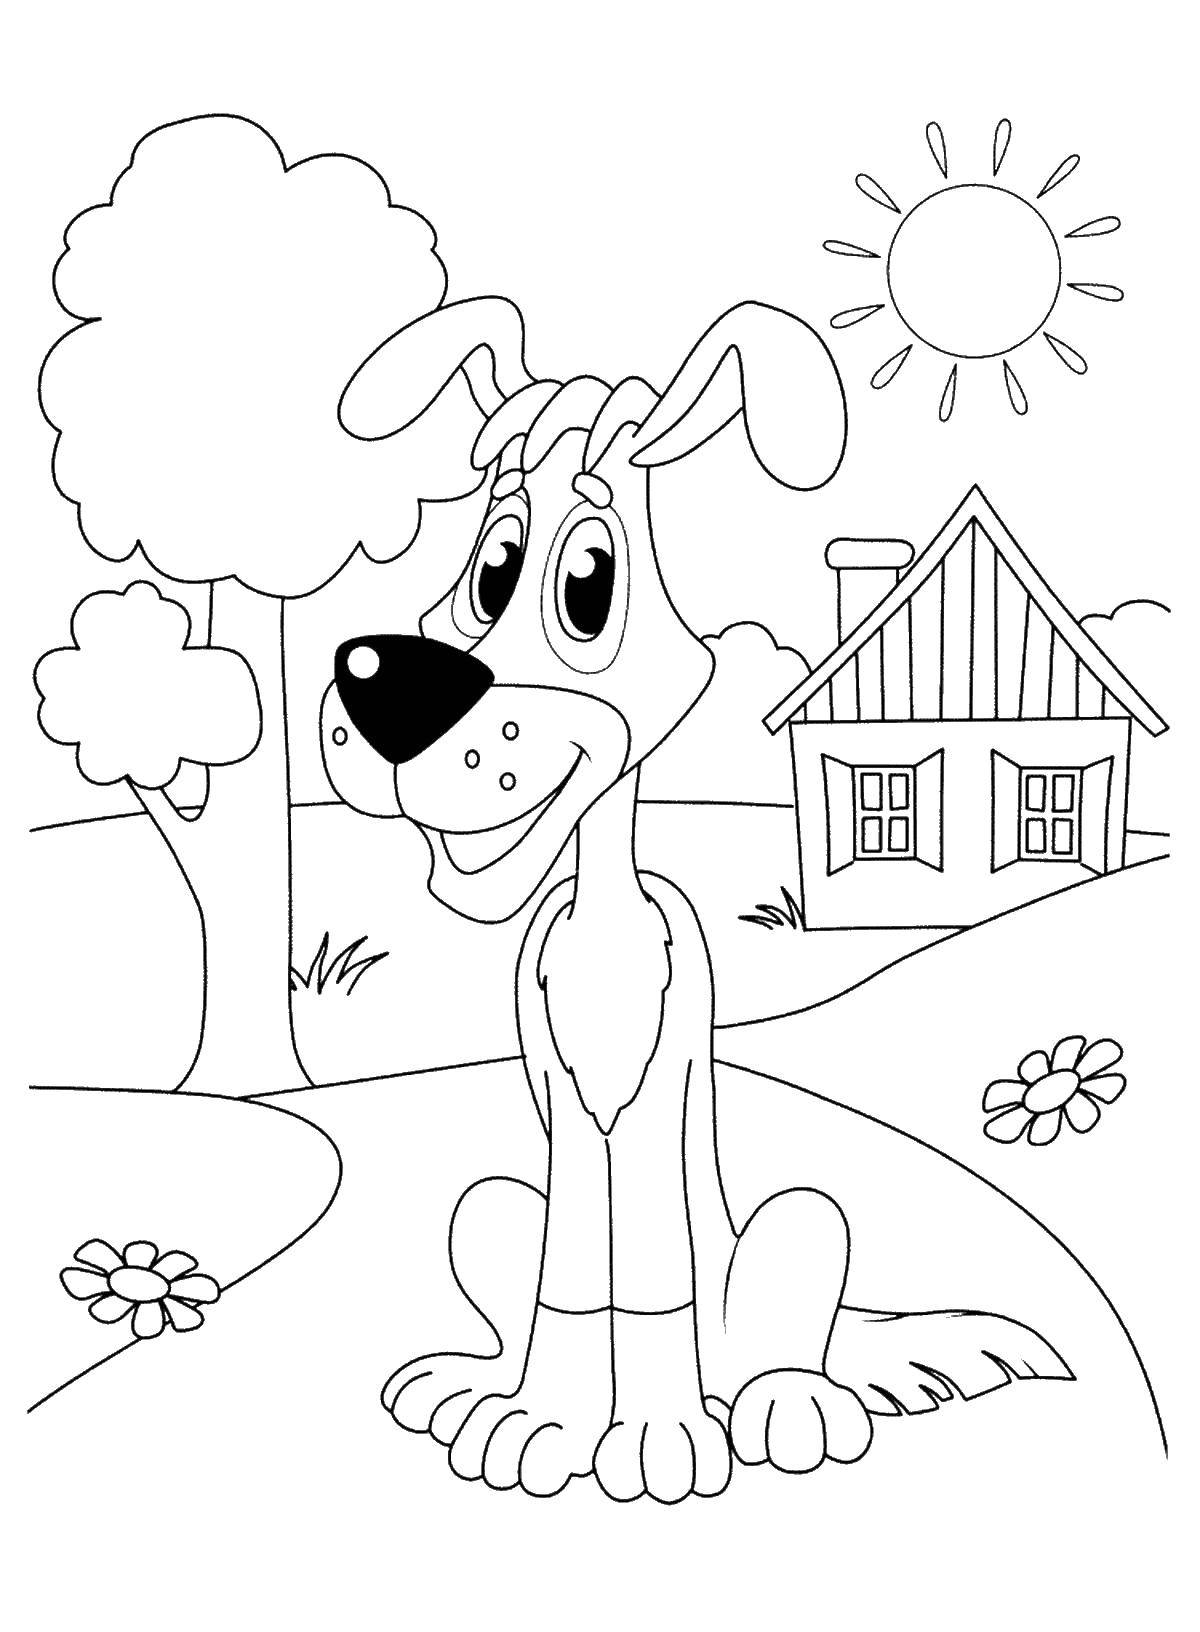 Coloring Dog. Category the village. Tags:  village, dog, house.